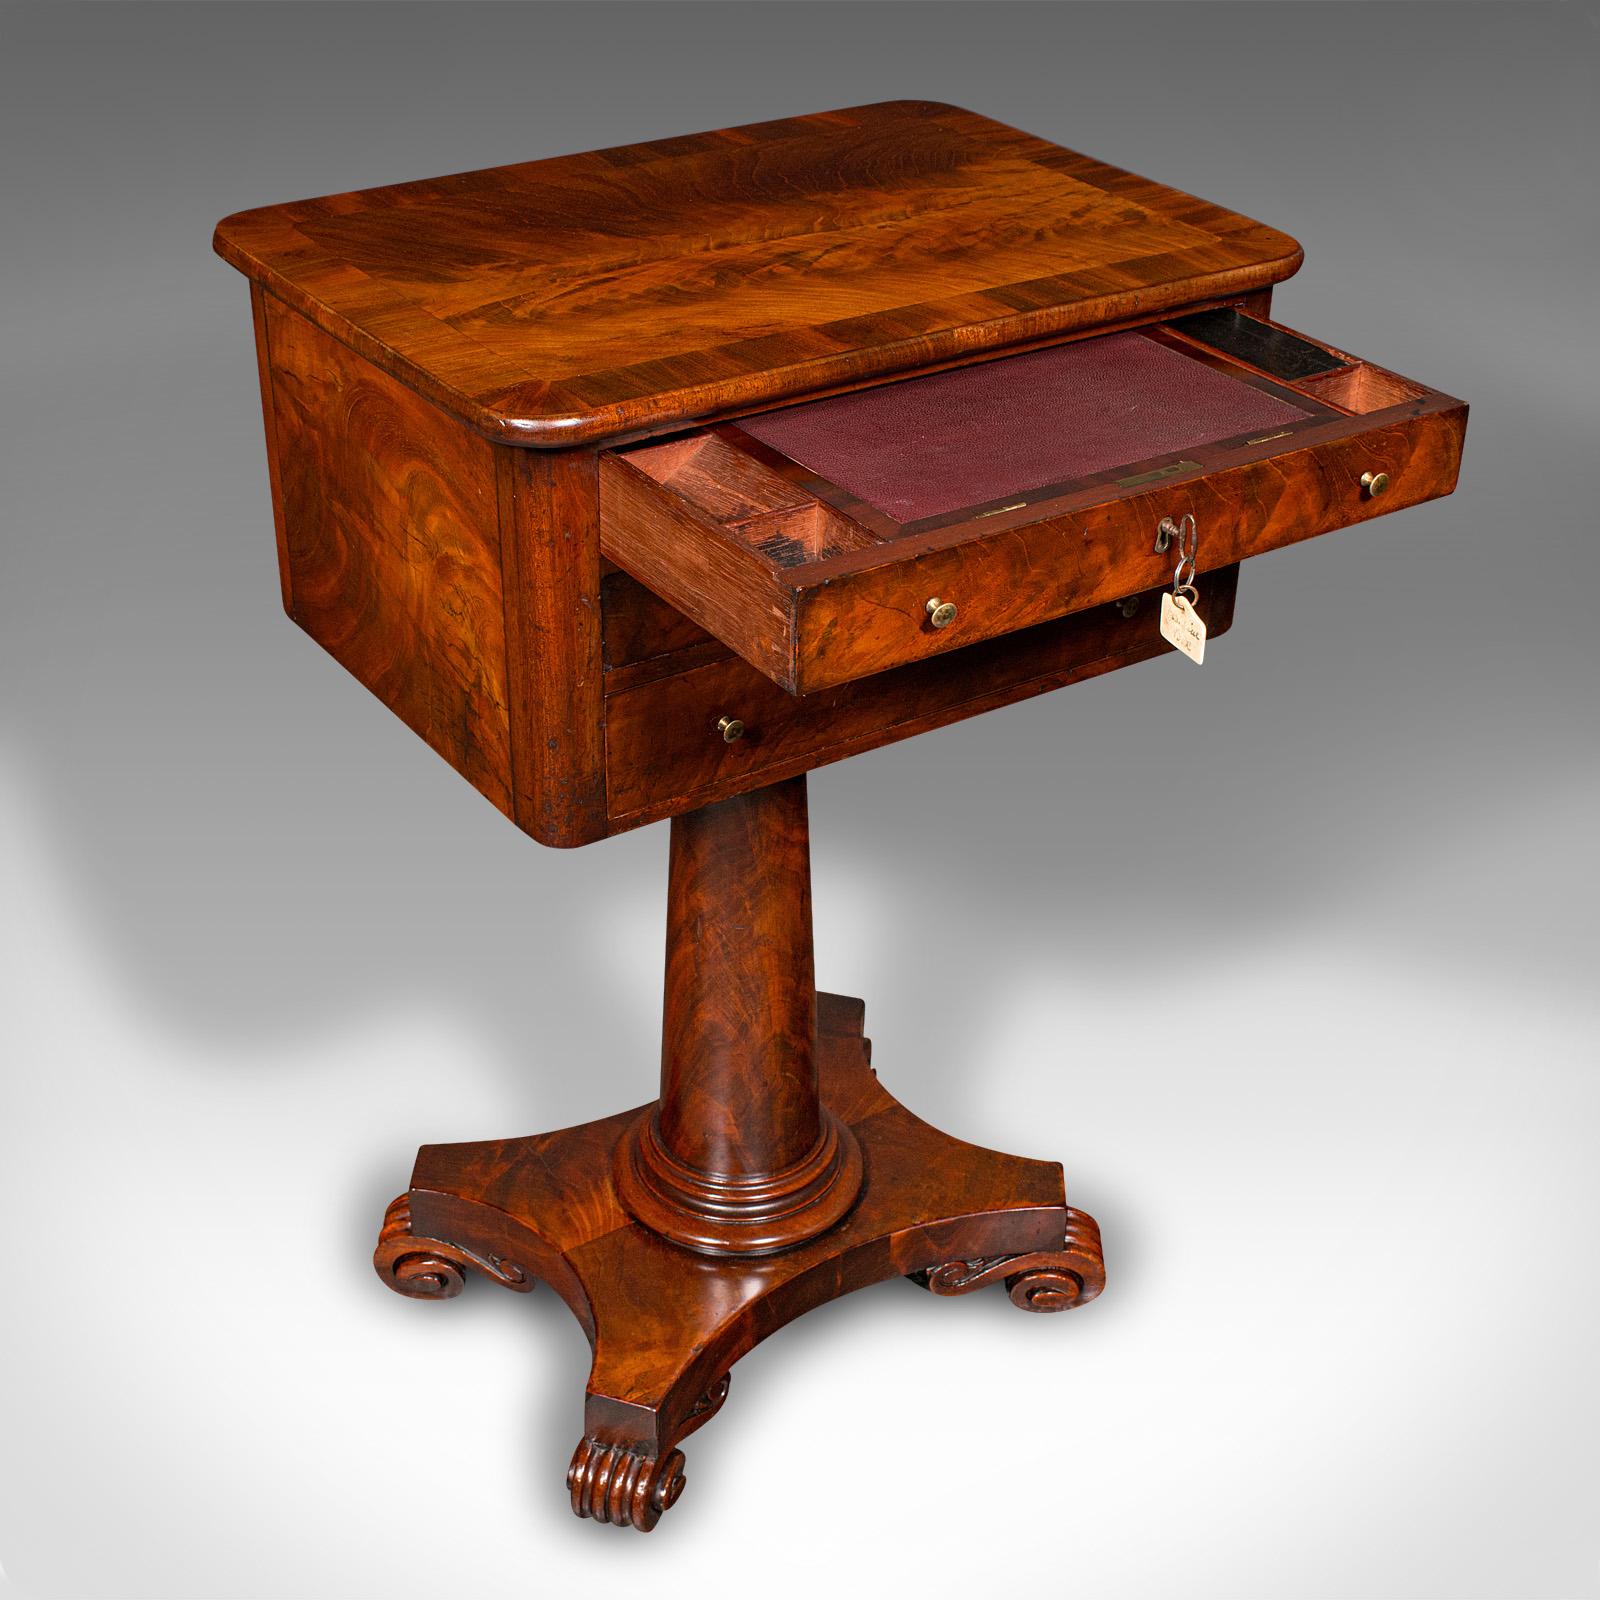 This is a small antique ladies correspondence table. An English, flame mahogany writing table, dating to the William IV period, circa 1835.

Fine suite of functions and storage across an appealing, compact form
Displays a desirable aged patina and